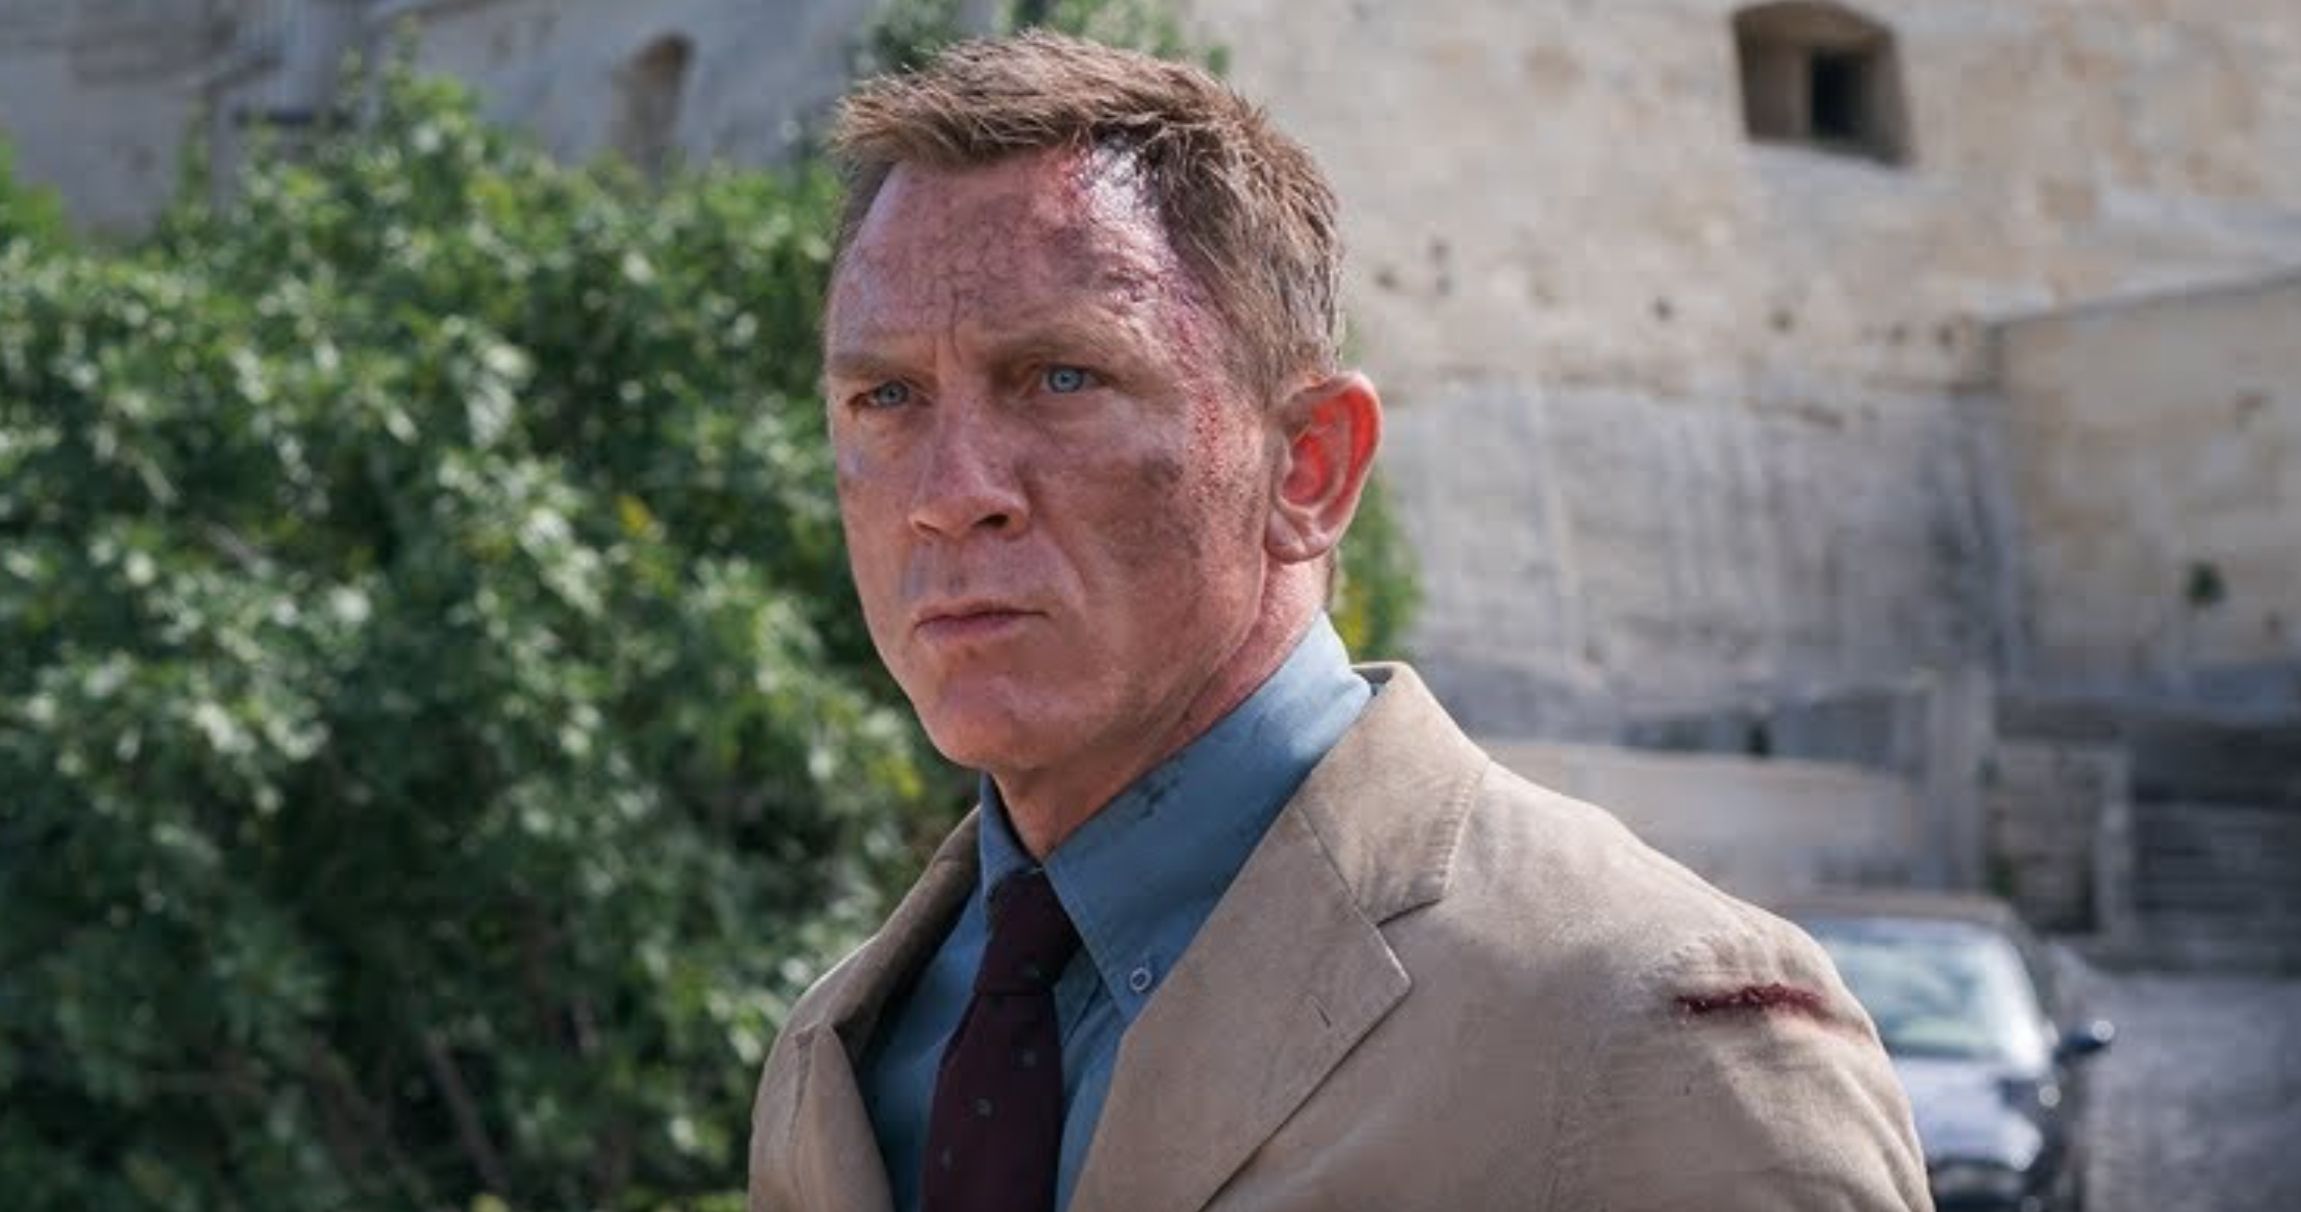 New No Time to Die Trailer Arrives, Bond Is Back in Theaters This October